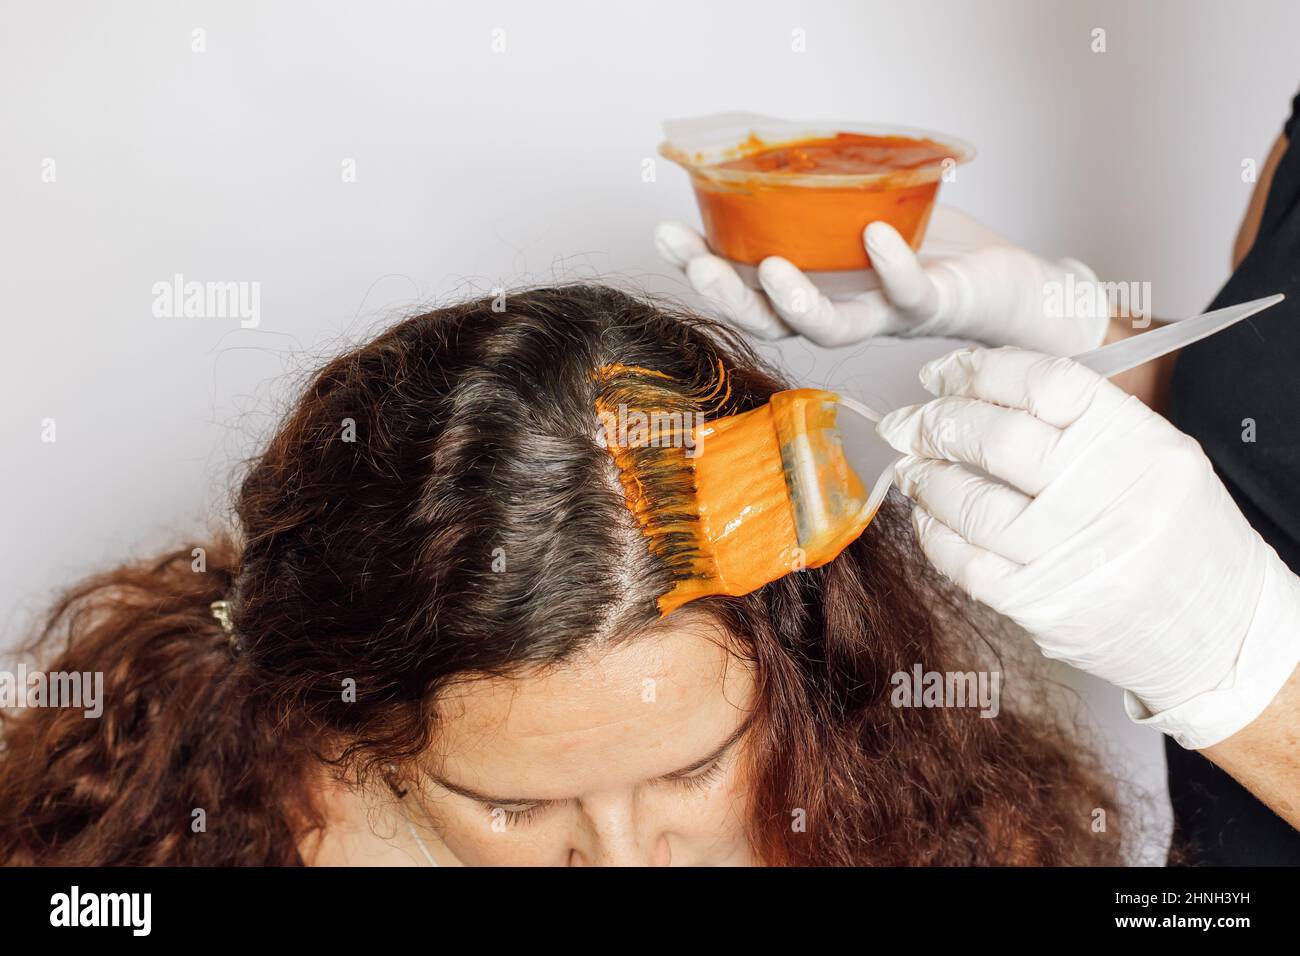 https://c8.alamy.com/comp/2HNH3YH/woman-with-coloring-brush-in-one-hand-and-hair-dye-bowl-in-the-other-applying-red-substance-on-woman-hair-roots-hair-coloring-at-home-getting-rid-of-2HNH3YH.jpg